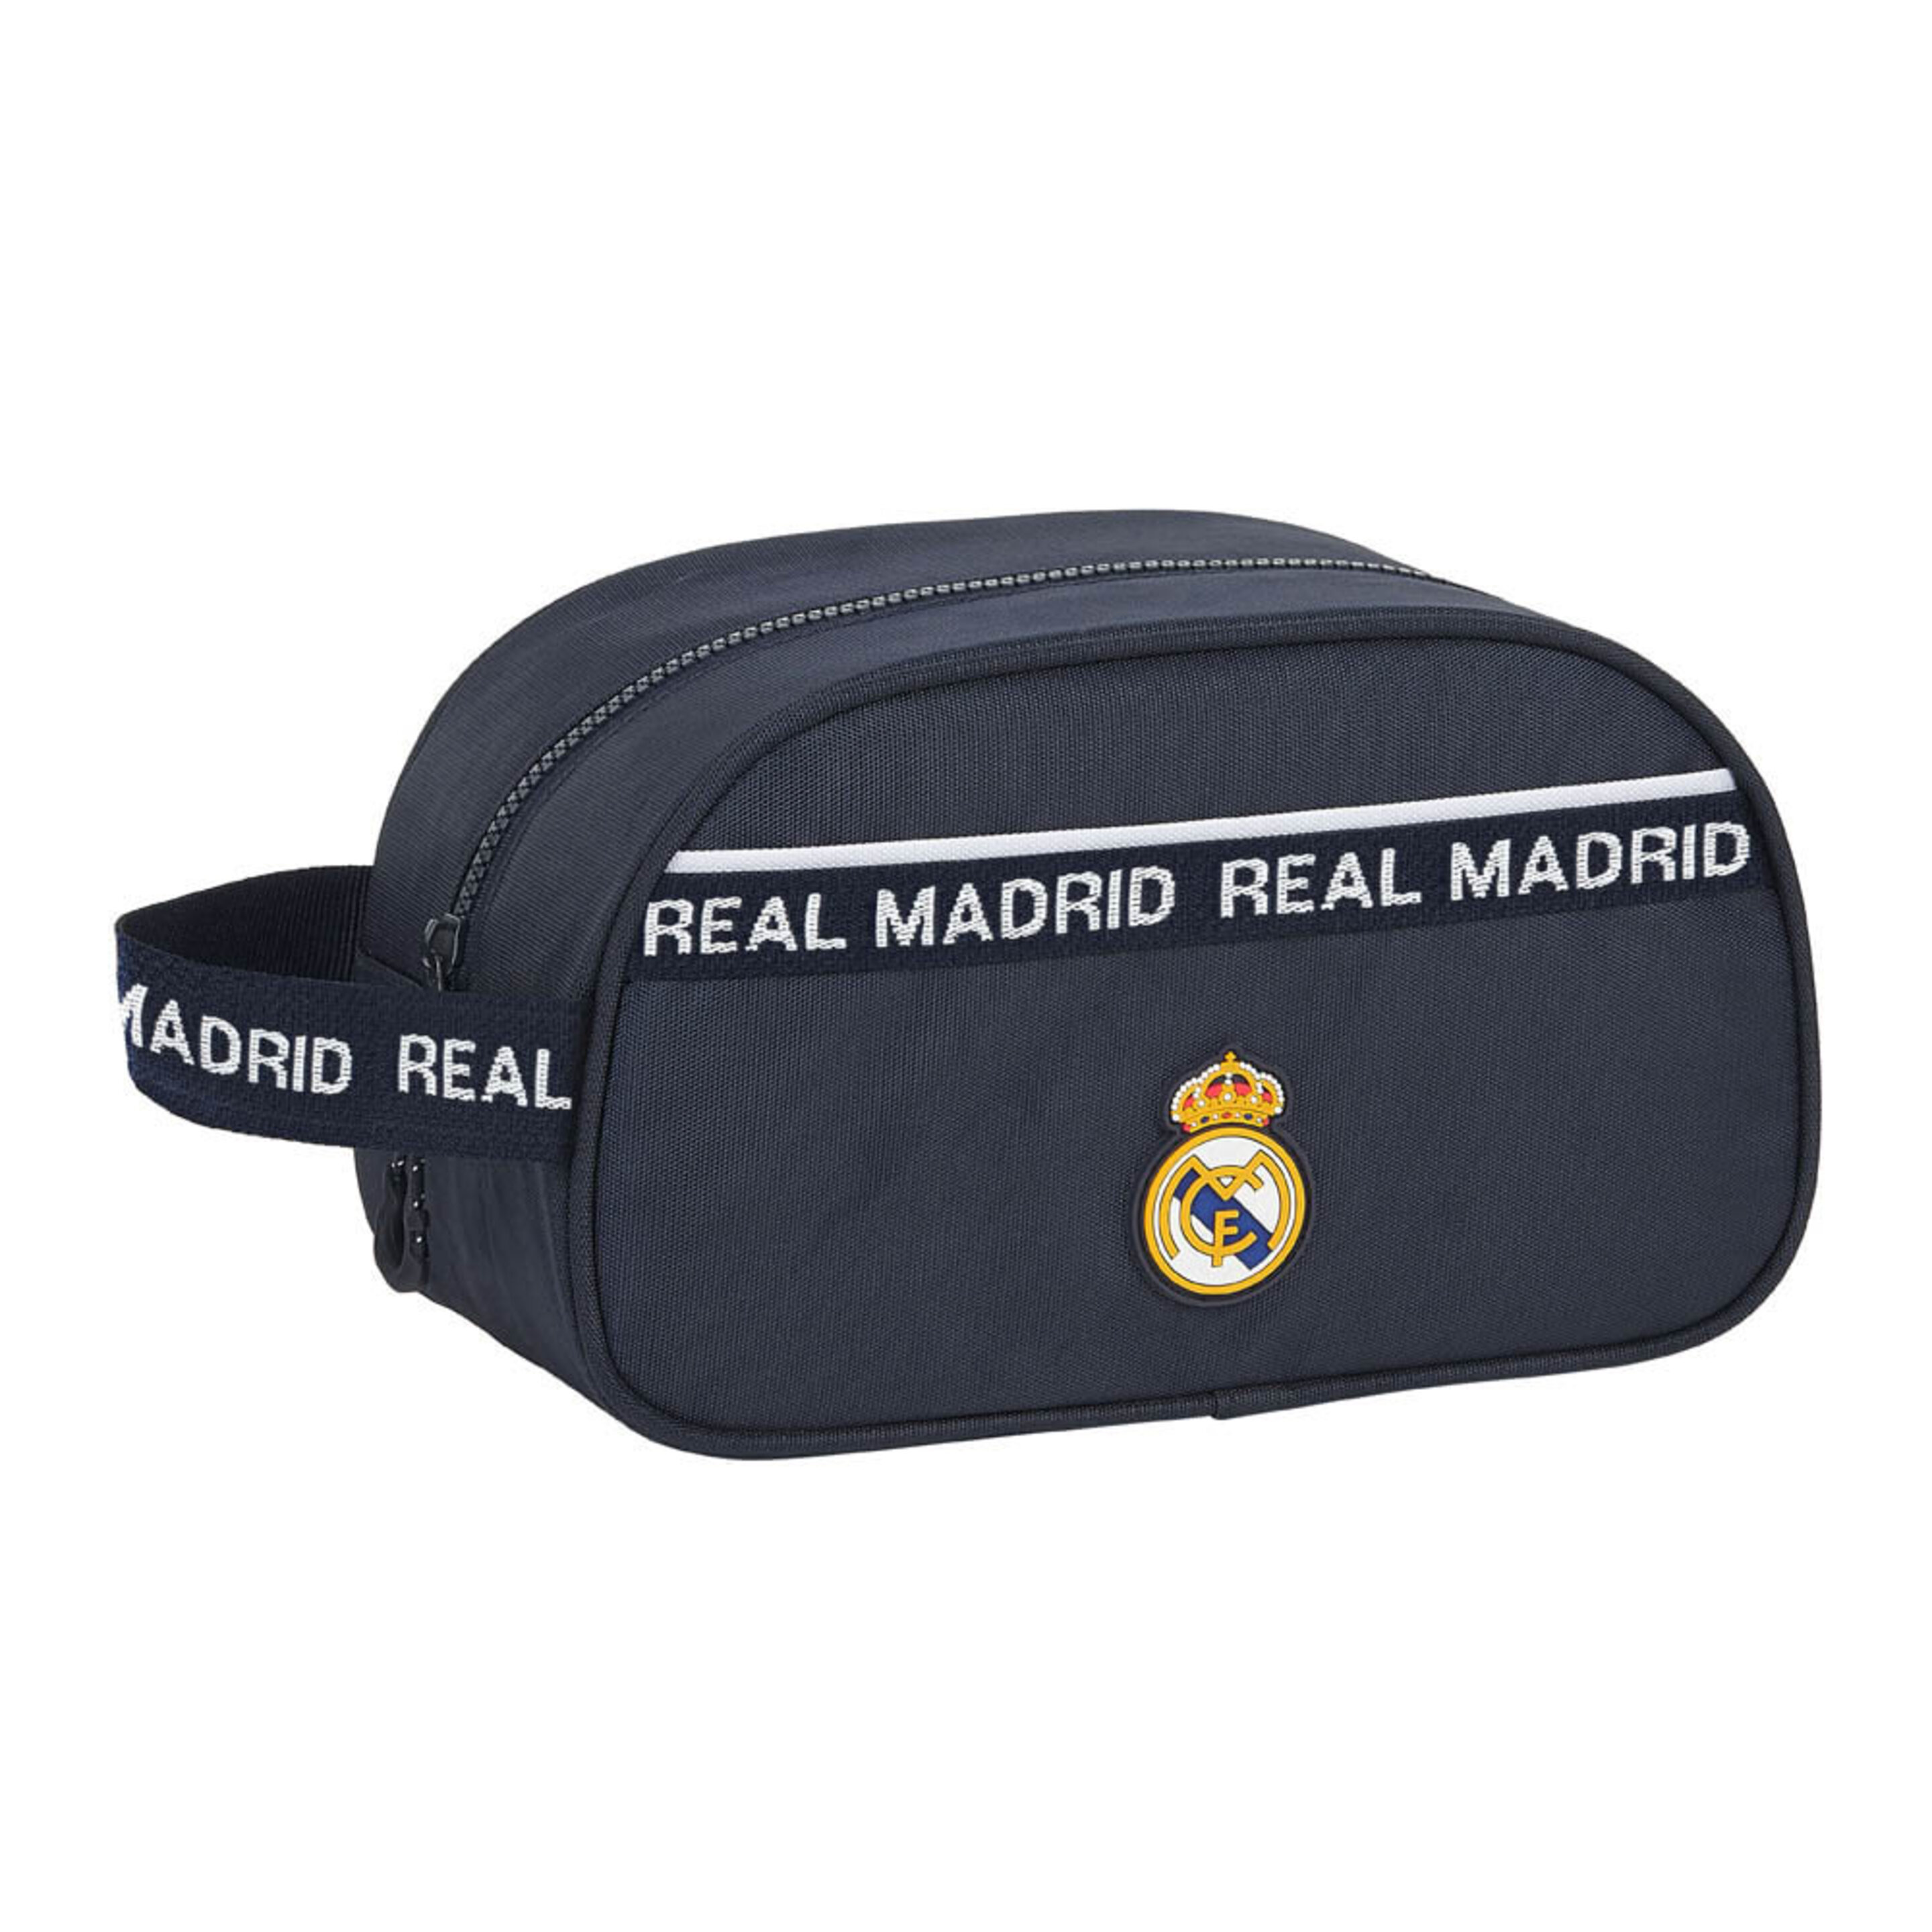 Neceser Real Madrid Adaptable